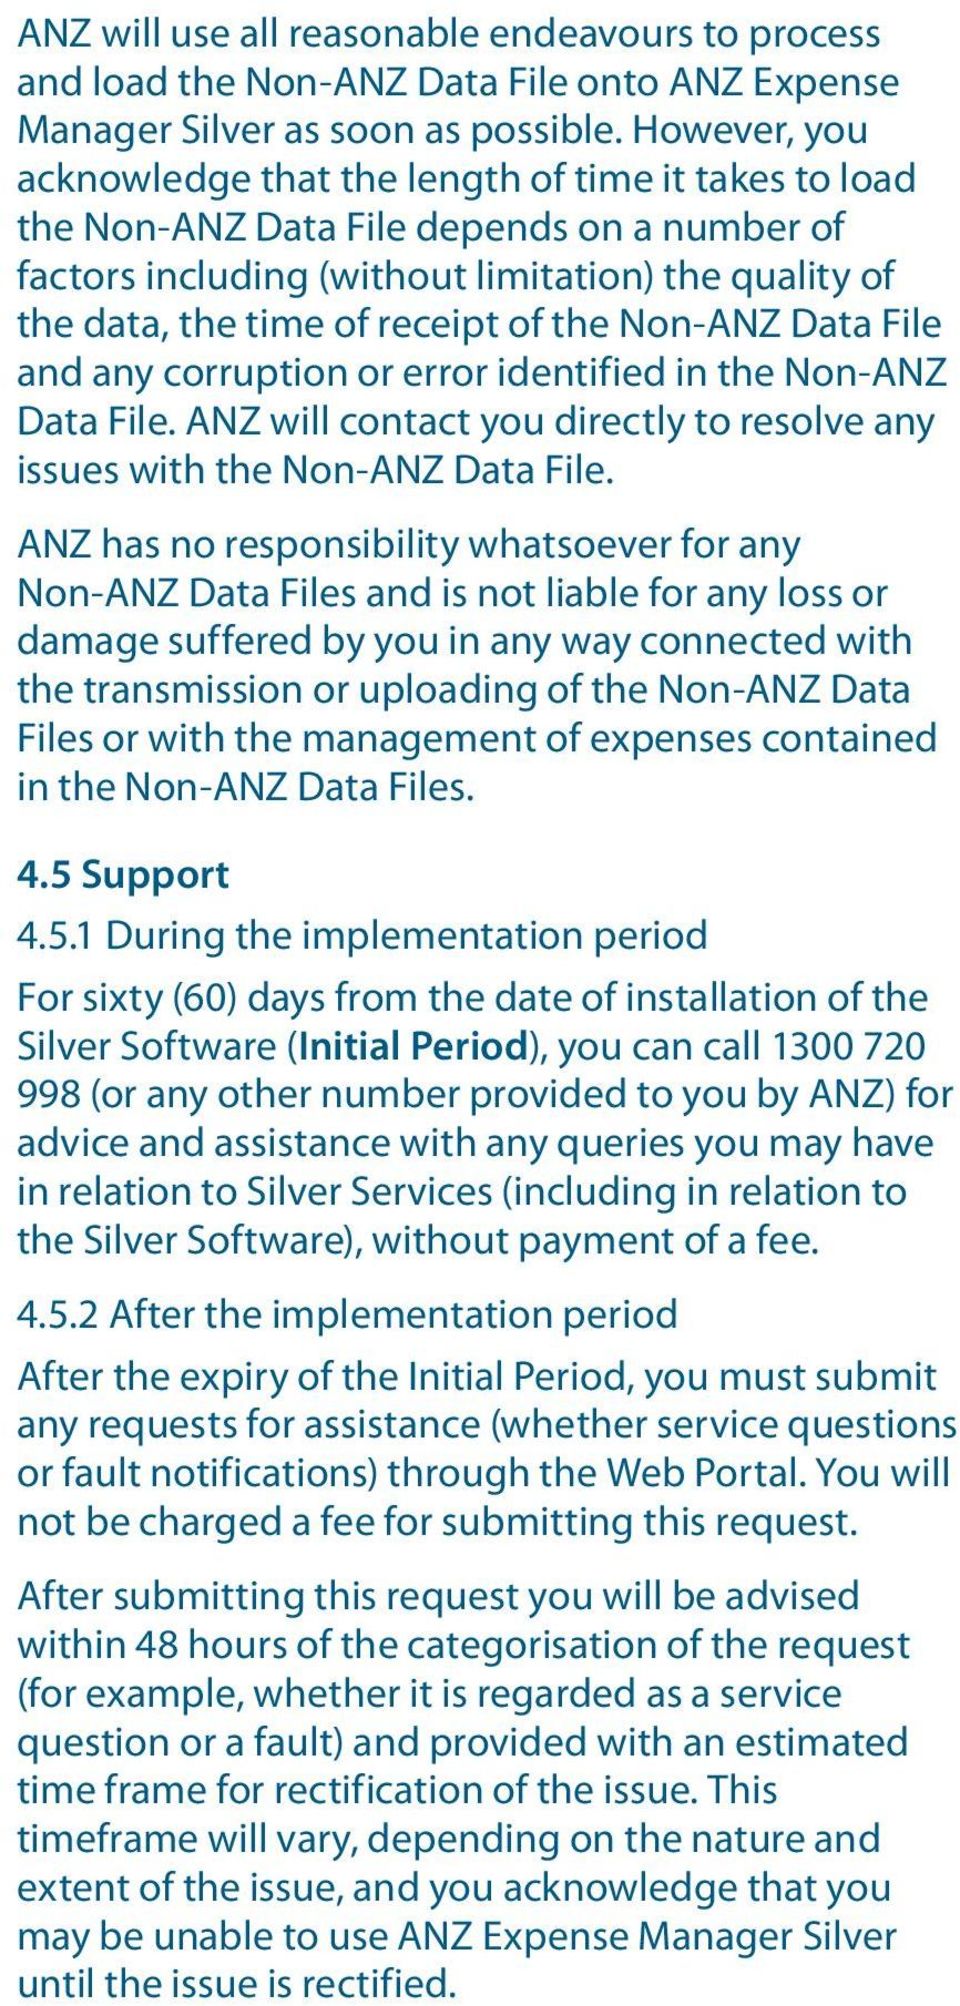 the Non-ANZ Data File and any corruption or error identified in the Non-ANZ Data File. ANZ will contact you directly to resolve any issues with the Non-ANZ Data File.